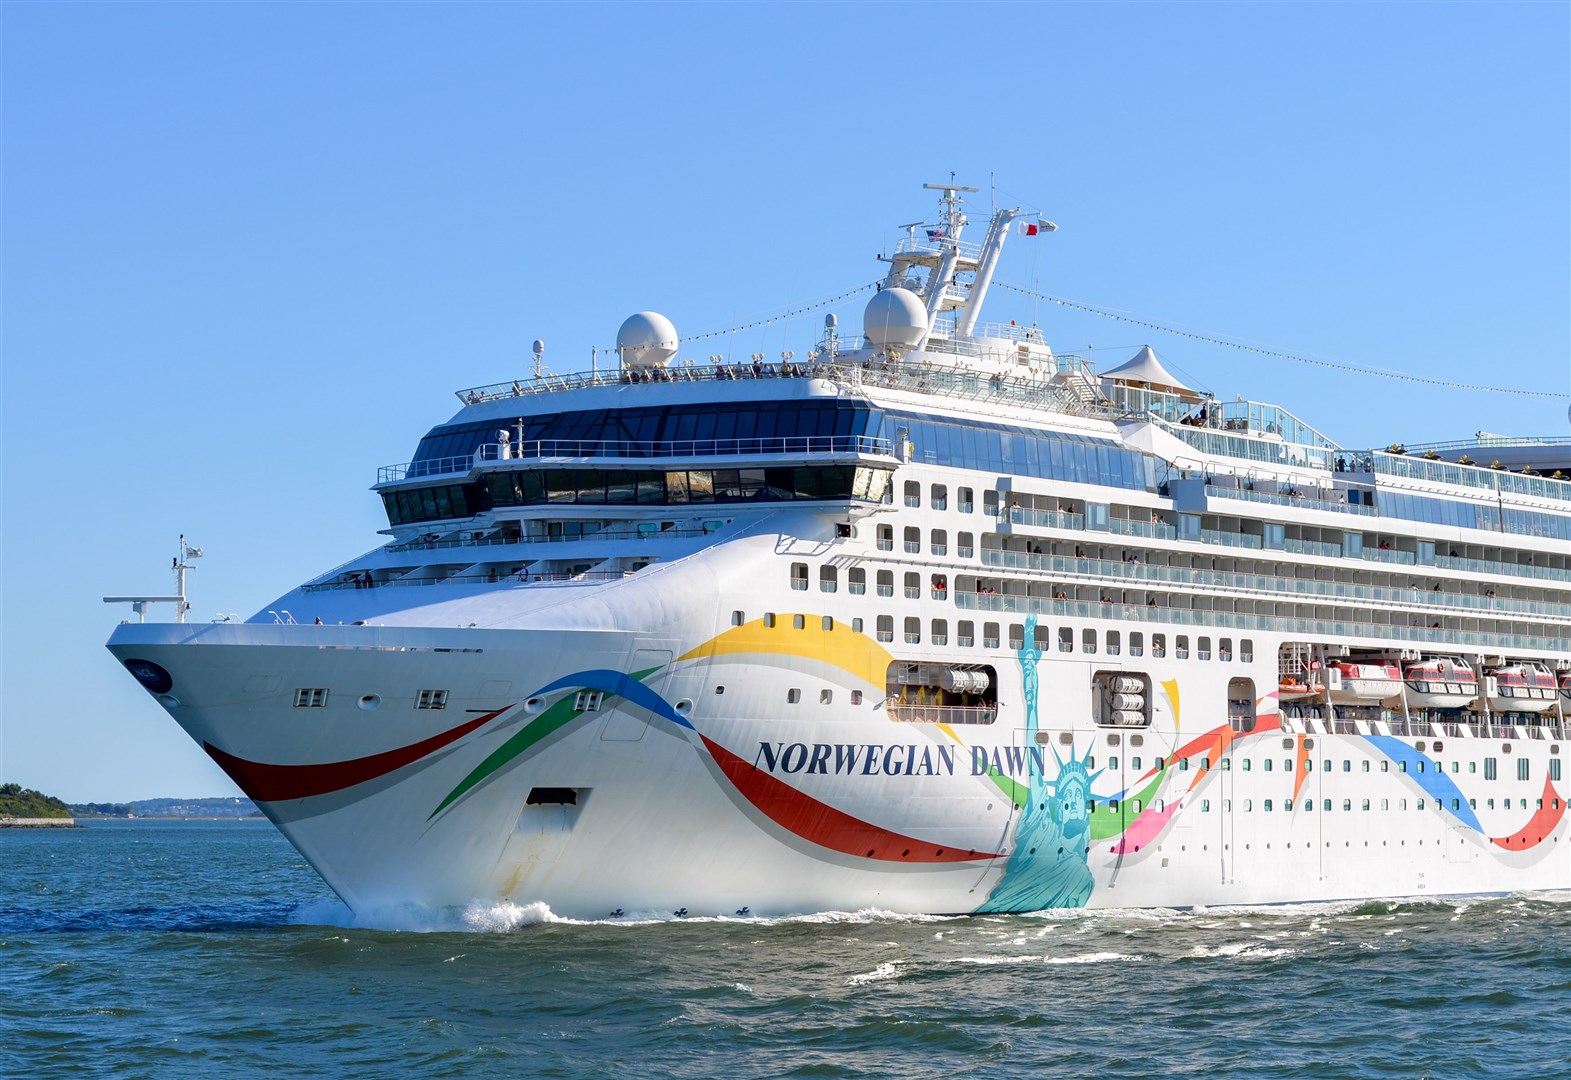 The Norweigan Dawn cruise ship in 2014. Picture: Fletcher6, CC BY 4.0 <https://creativecommons.org/licenses/by/4.0>, via Wikimedia Commons